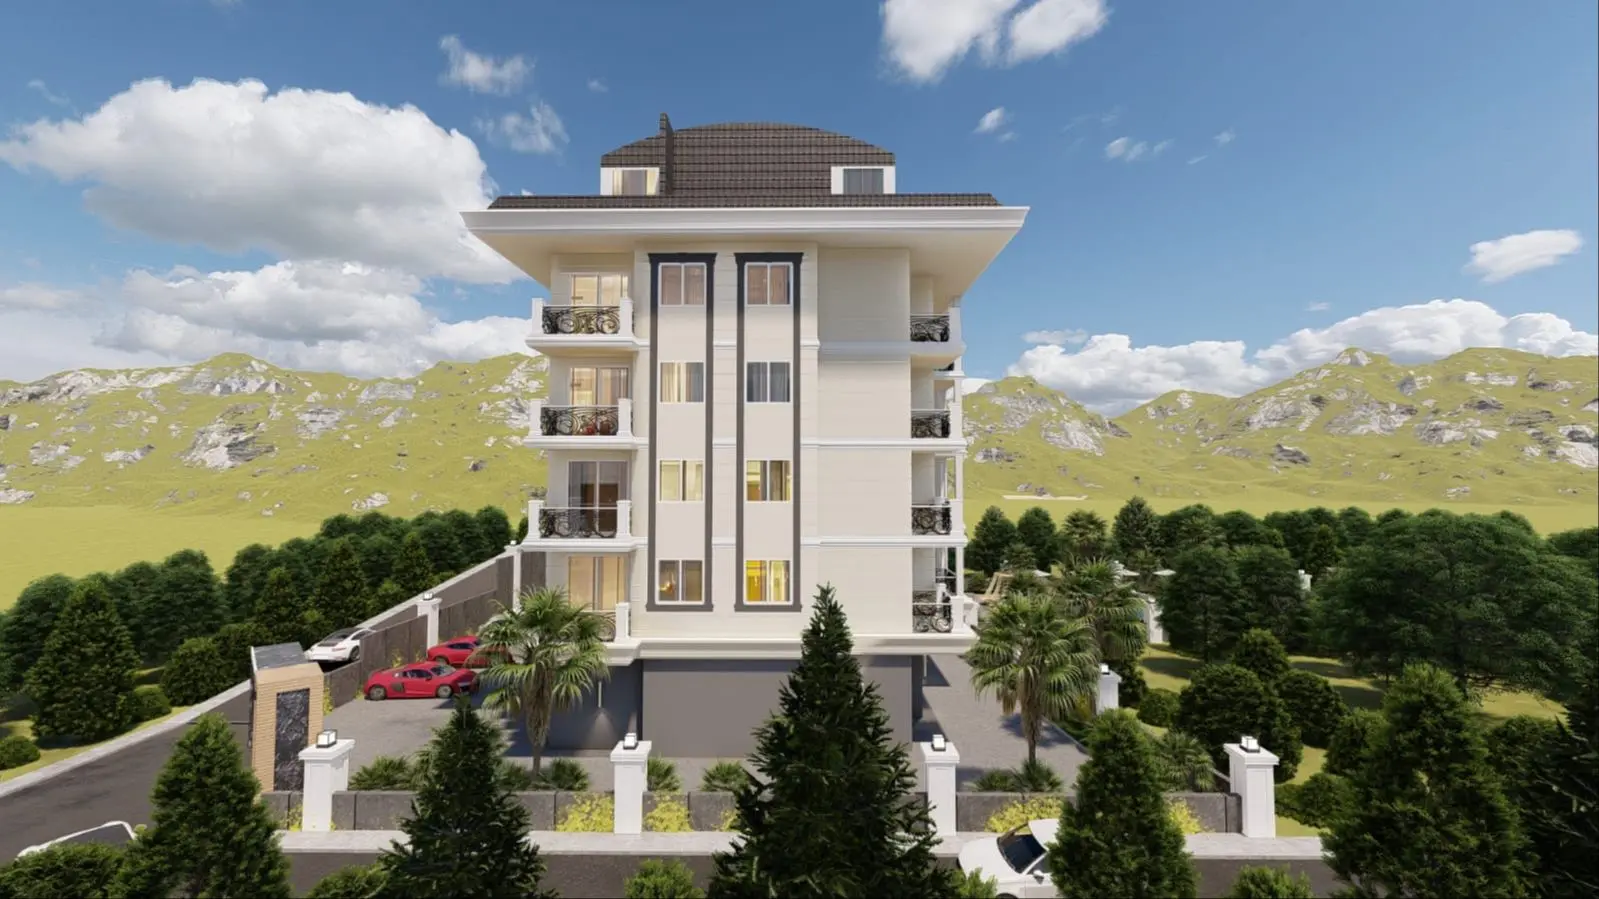 NEW BOUTIQUE HOUSING PROJECT IN DEMIRTAŞ DISTRICT